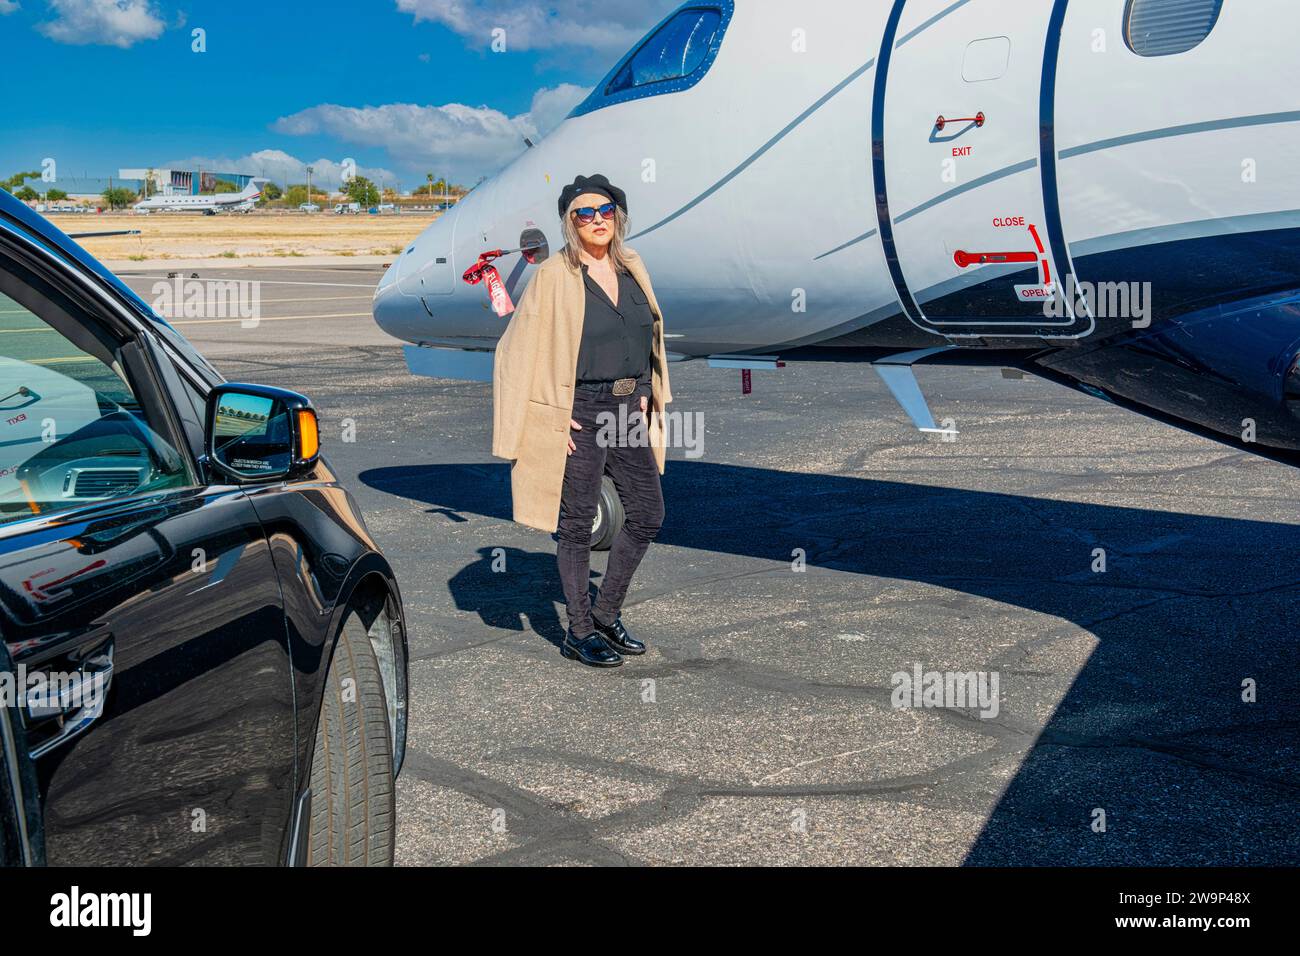 First World problem - VIP person waits outside a locked private jet as the Pilot is late. Stock Photo